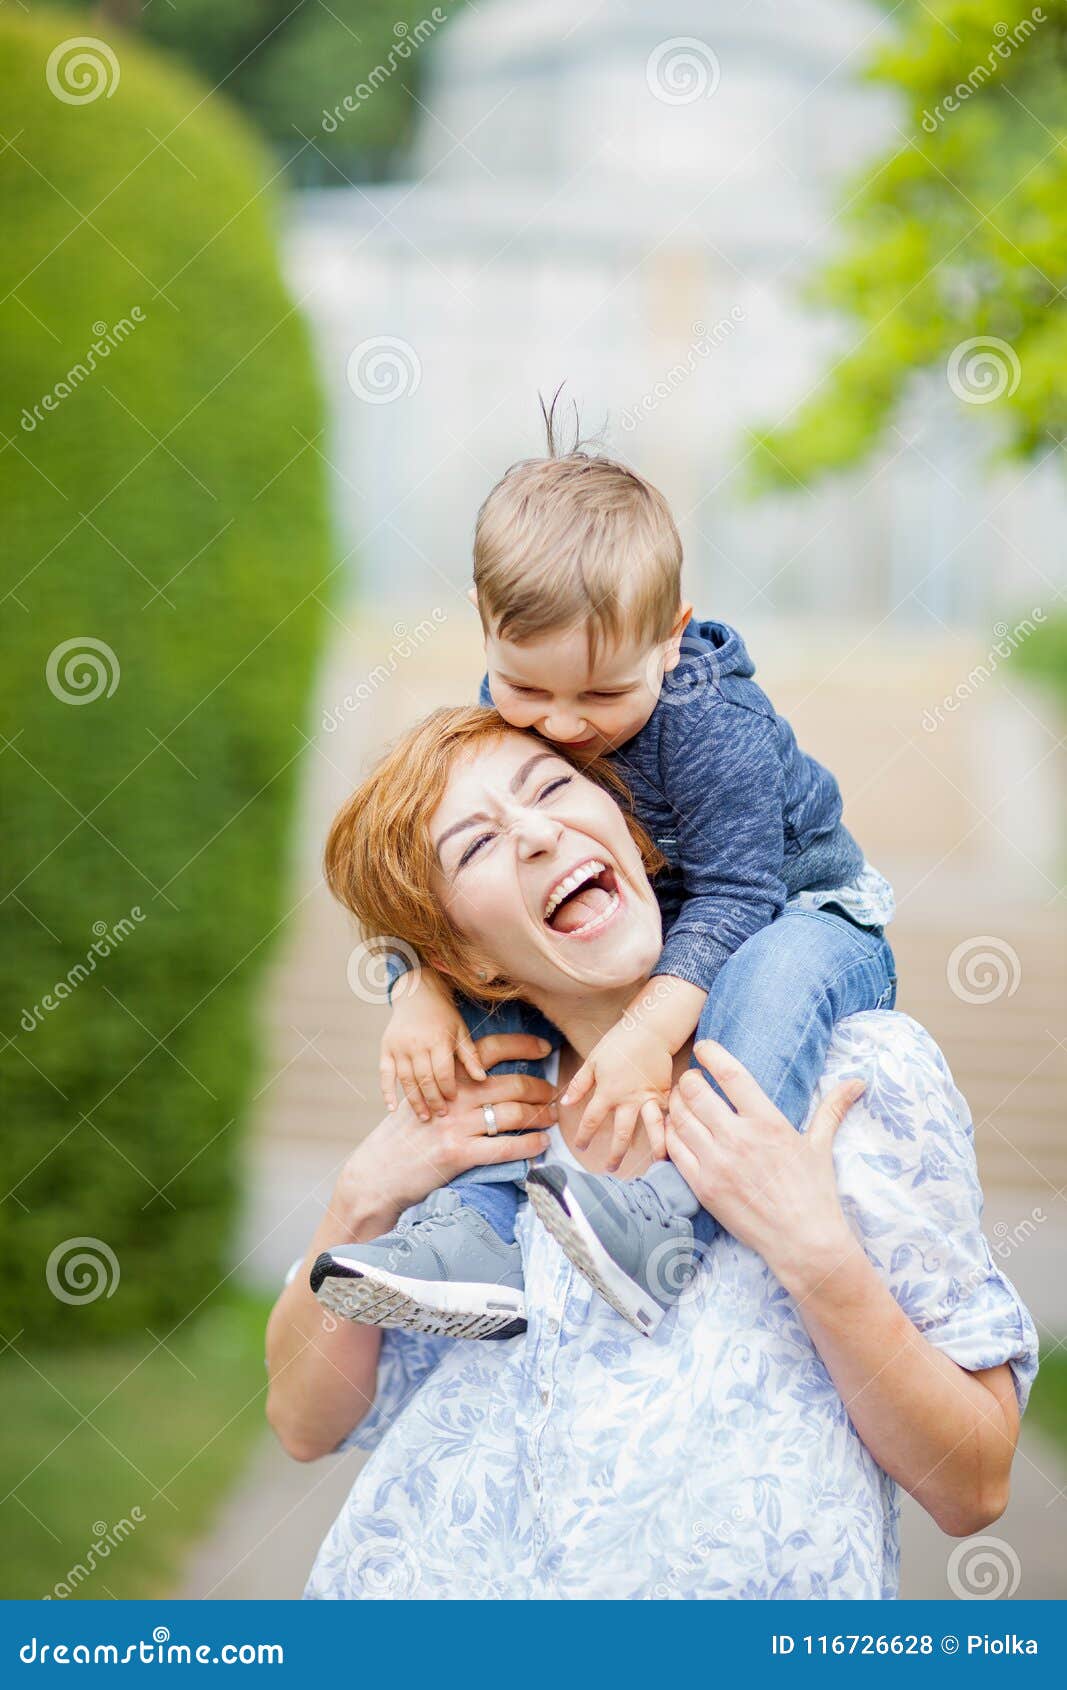 mother and son having fun together, giggle, happy and smiling